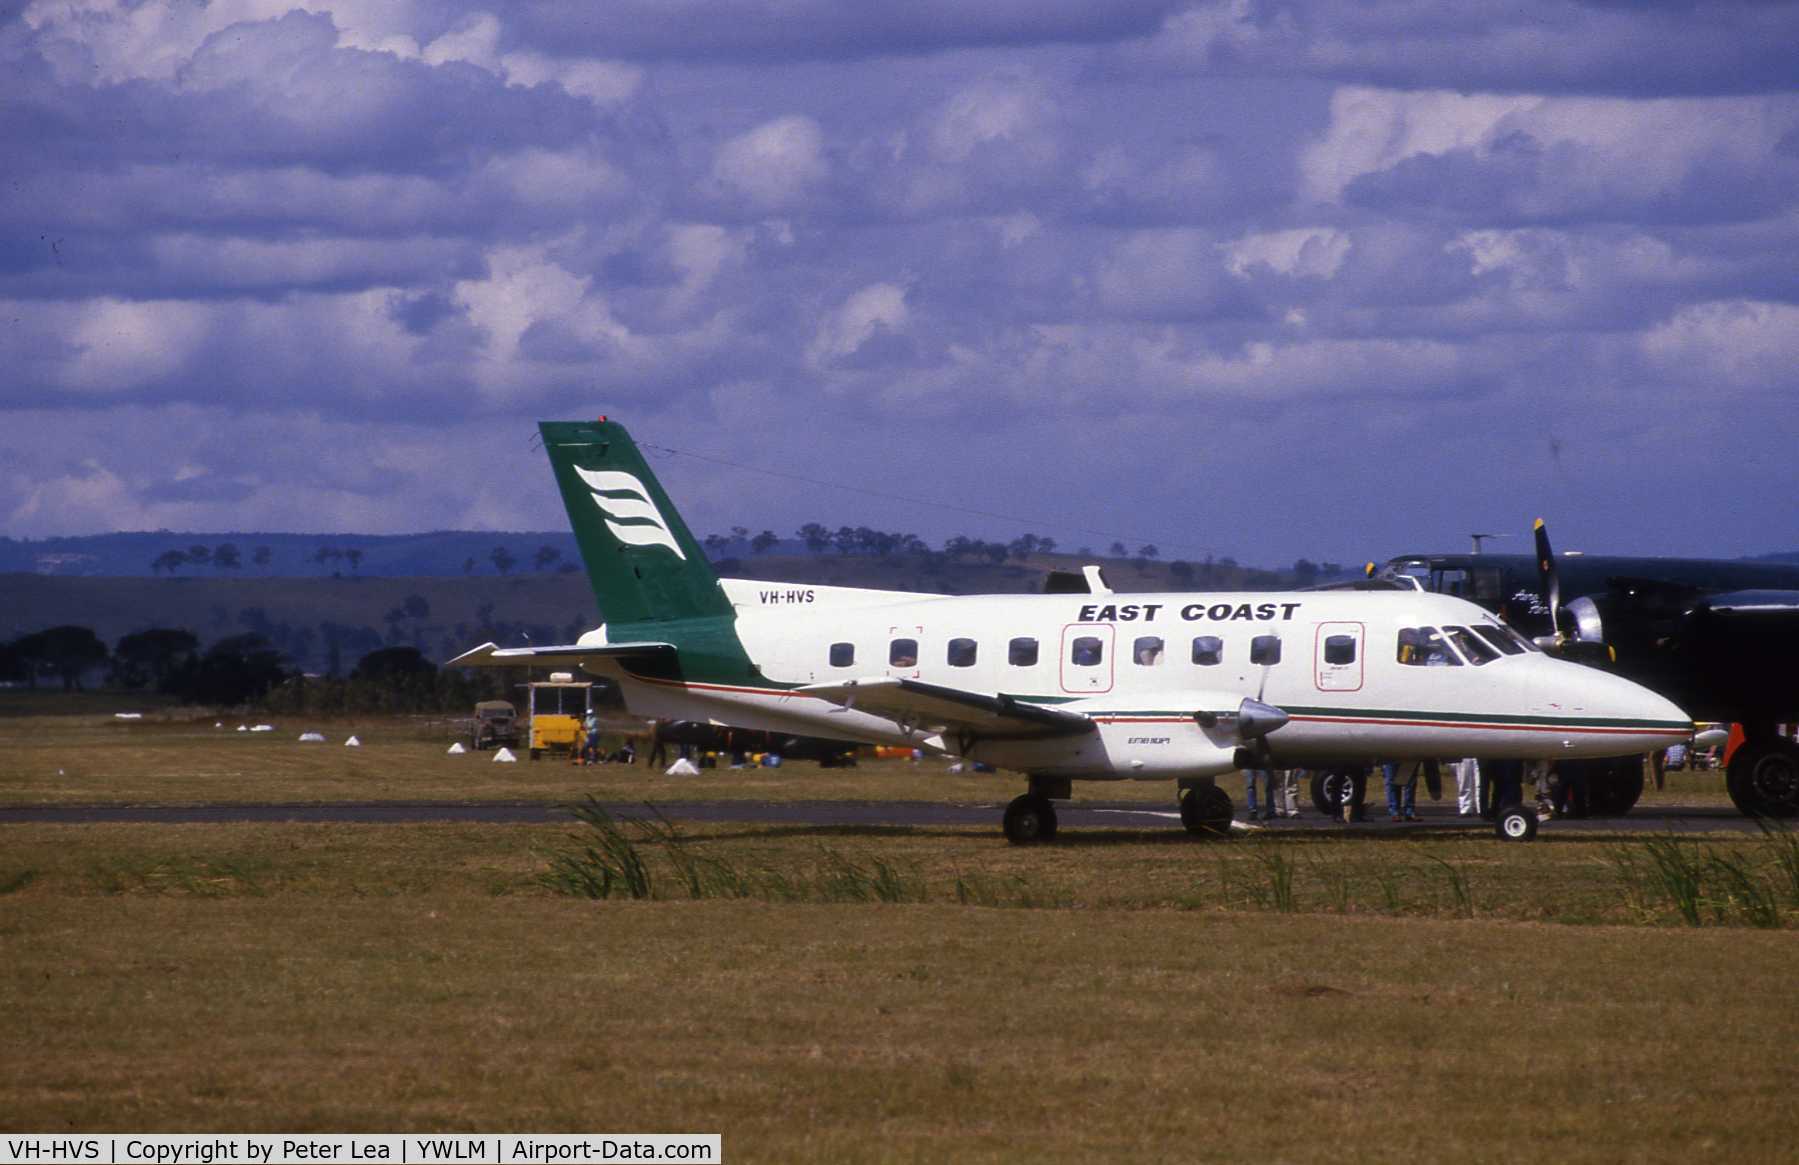 VH-HVS, 1979 Embraer EMB-110P1 Bandeirante C/N 110233, Photographed at Newcastle Airport, NSW in 1984 before company name changed to Eastern  Airlines